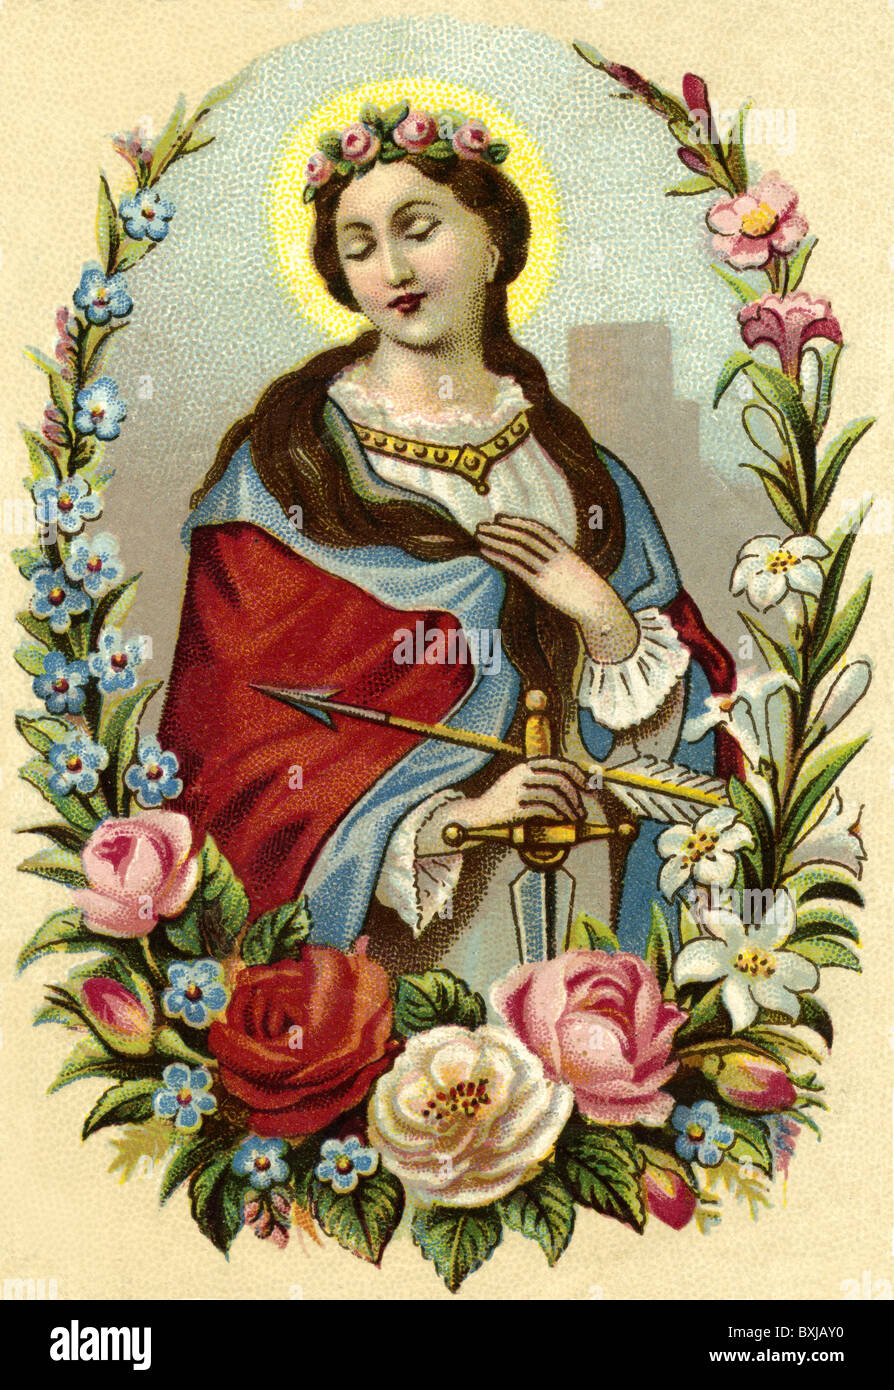 religion, Christianity, devotional image, saint Ursula, Germany, circa 1900, Additional-Rights-Clearences-Not Available Stock Photo